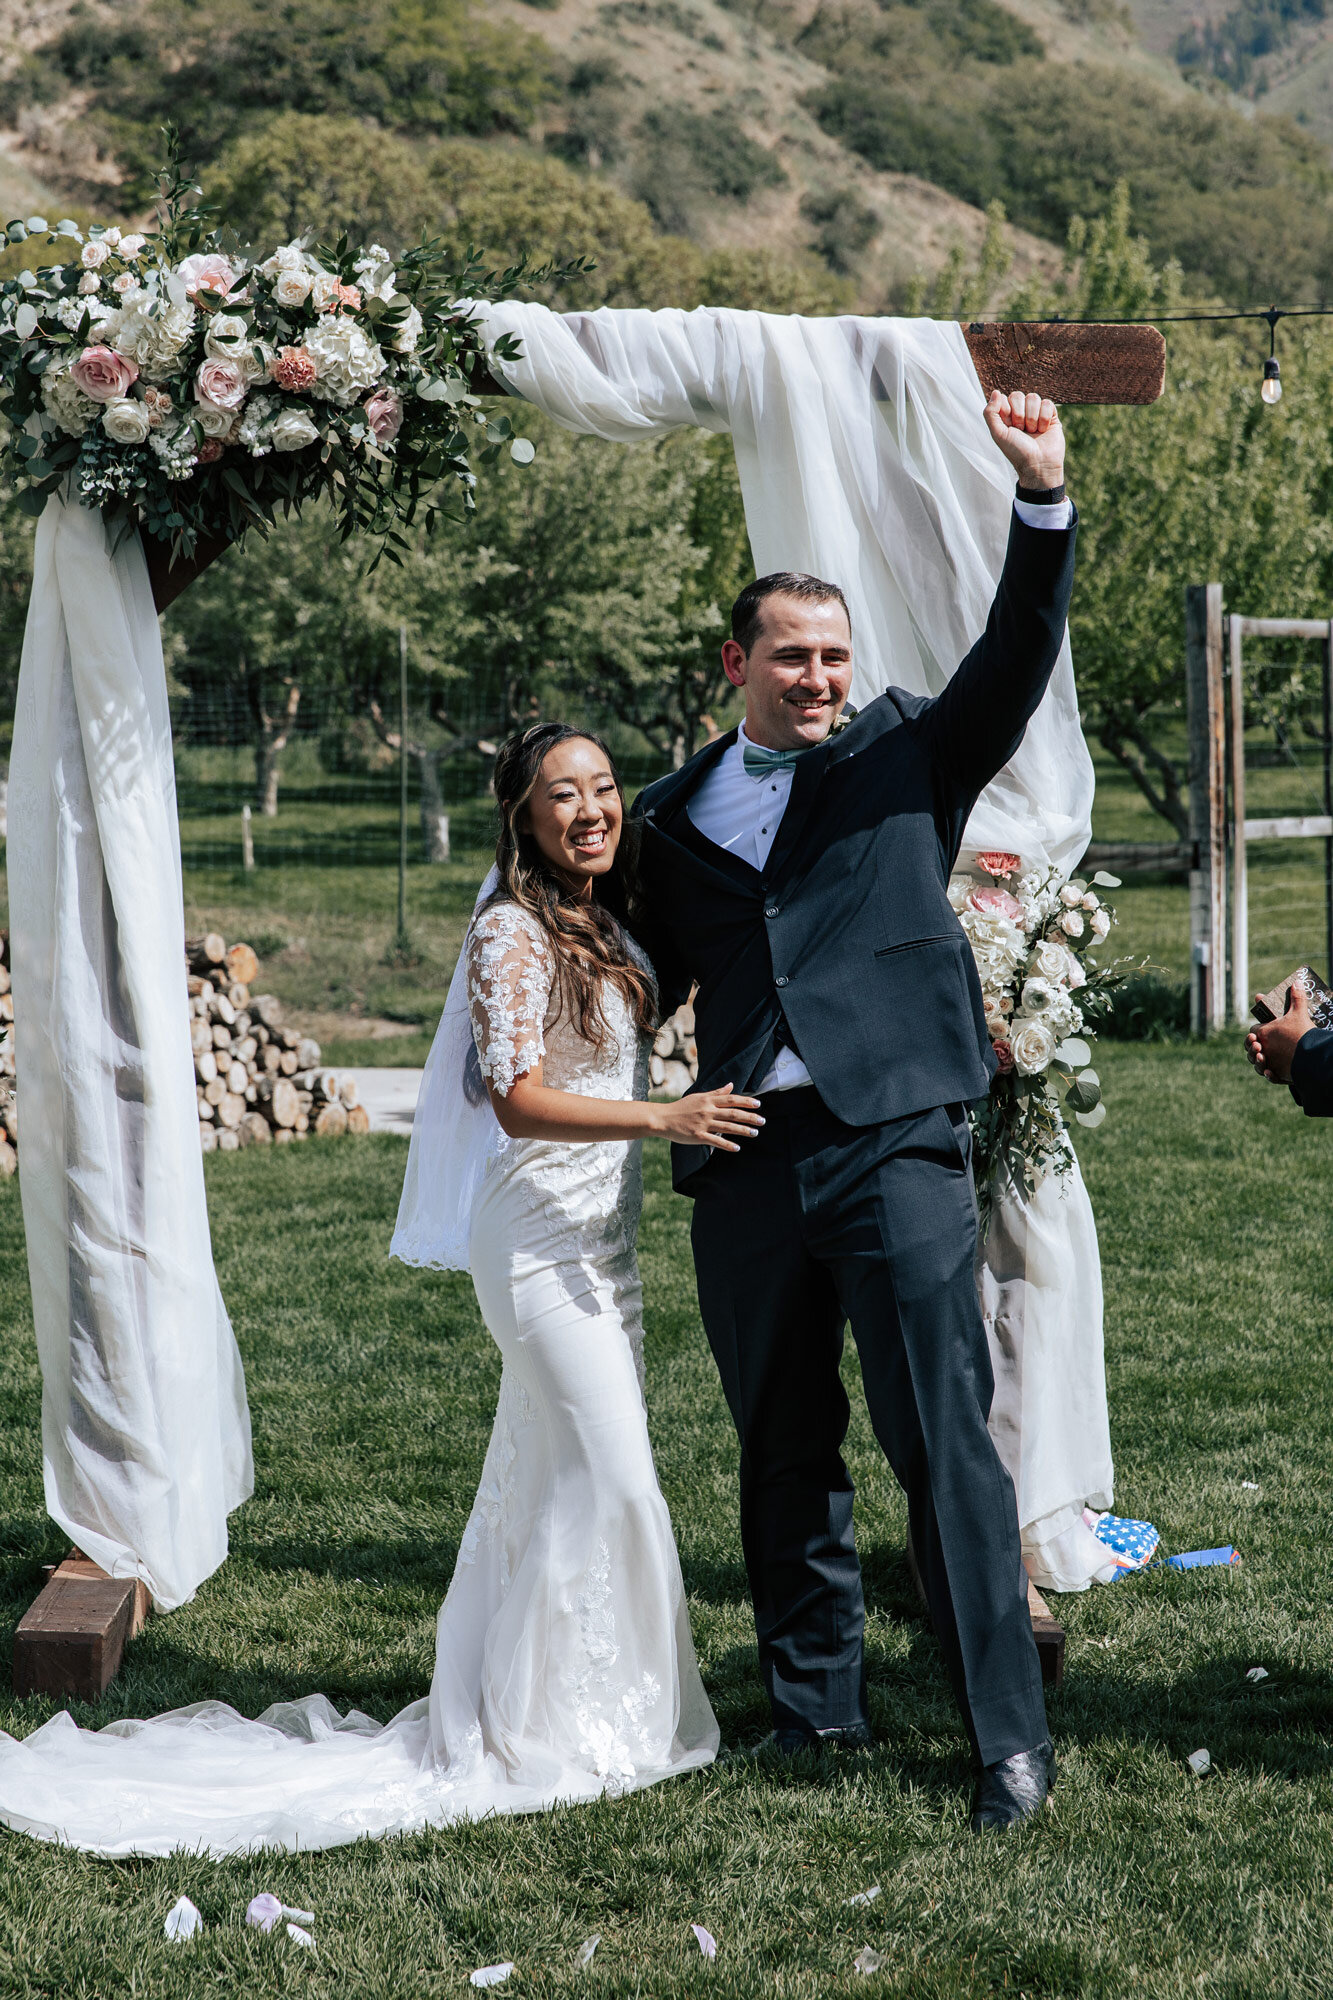  Husband raises his hand in a cheer after he marries his wife in Mapleton Utah by Professional wedding photographer Emily Jenkins Photography. husband cheers during marriage meadow wedding country wedding #emilyjenkinsphotography #emilyjenkinswedding